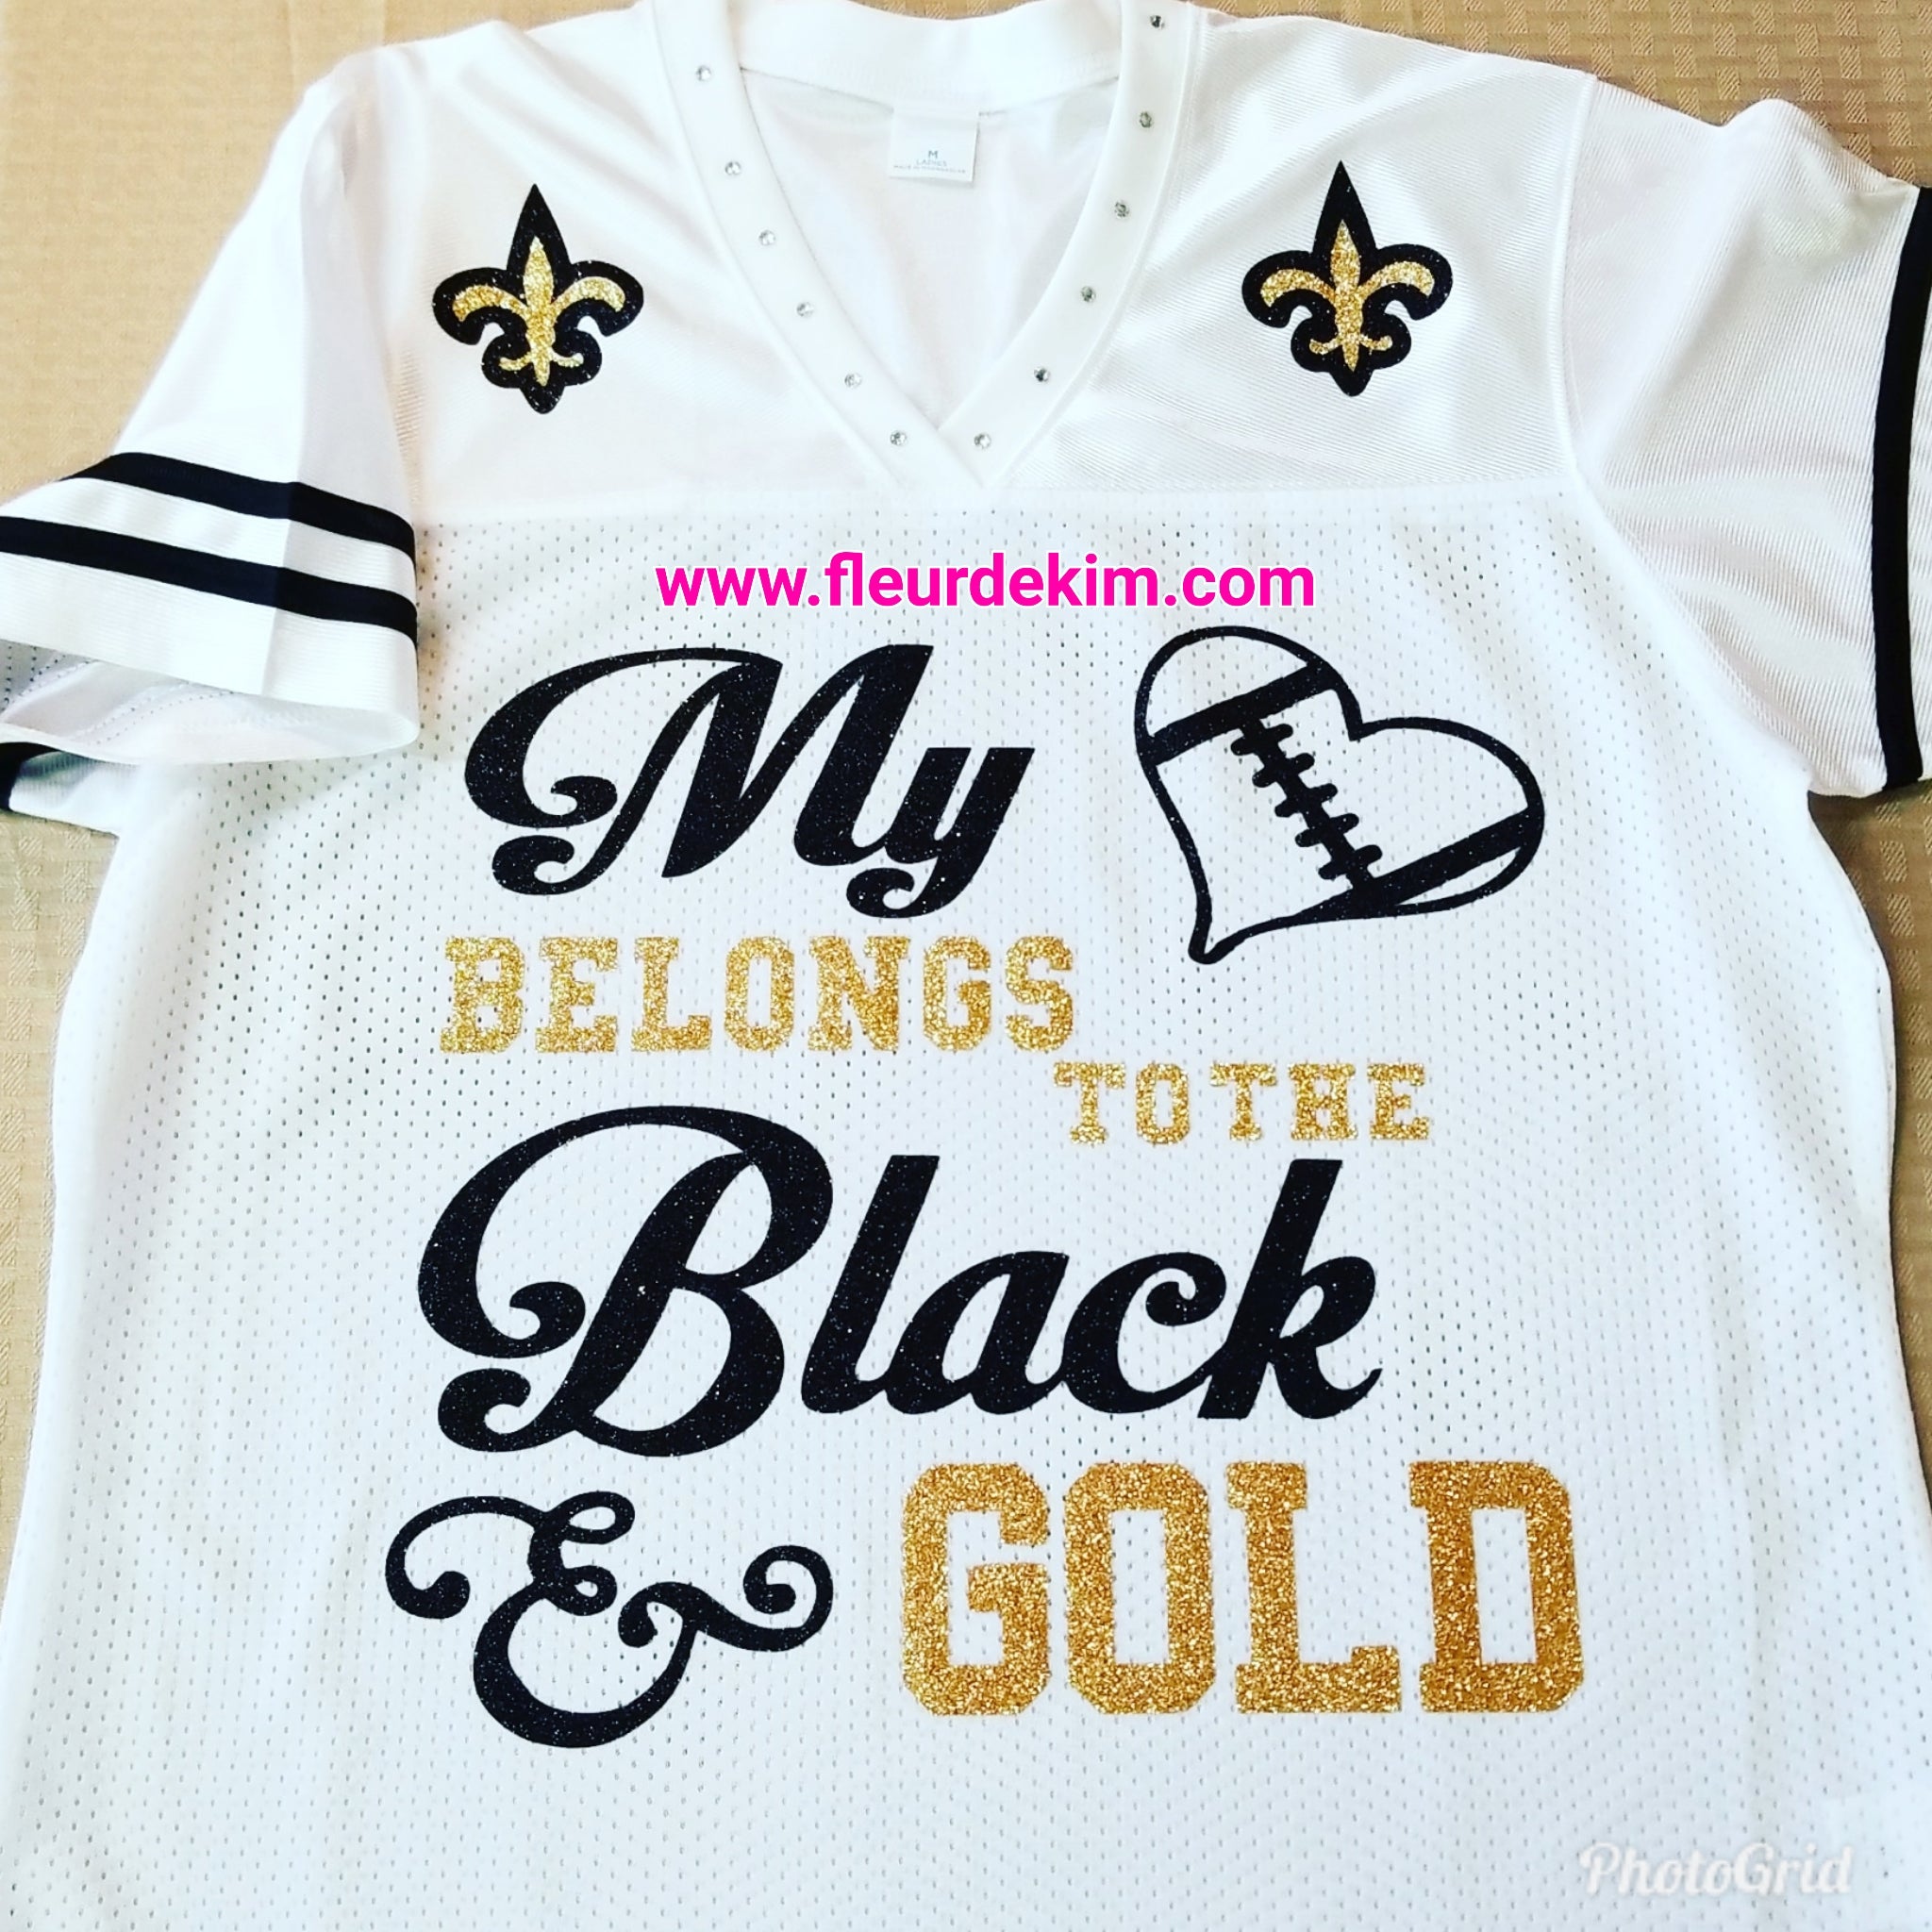 #bling jersey w/striped sleeves